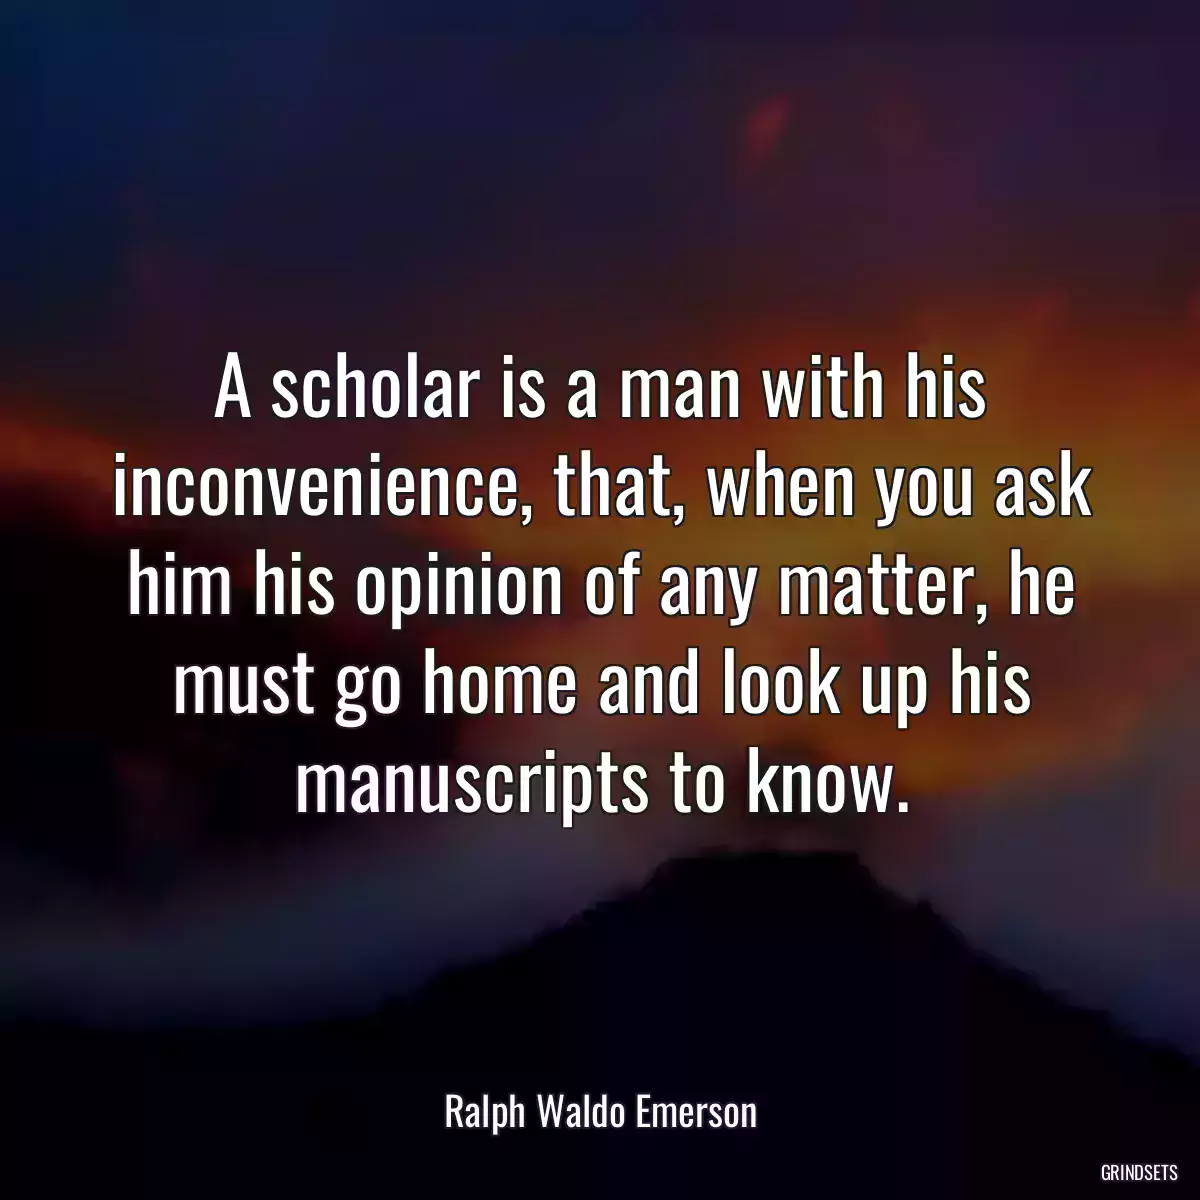 A scholar is a man with his inconvenience, that, when you ask him his opinion of any matter, he must go home and look up his manuscripts to know.